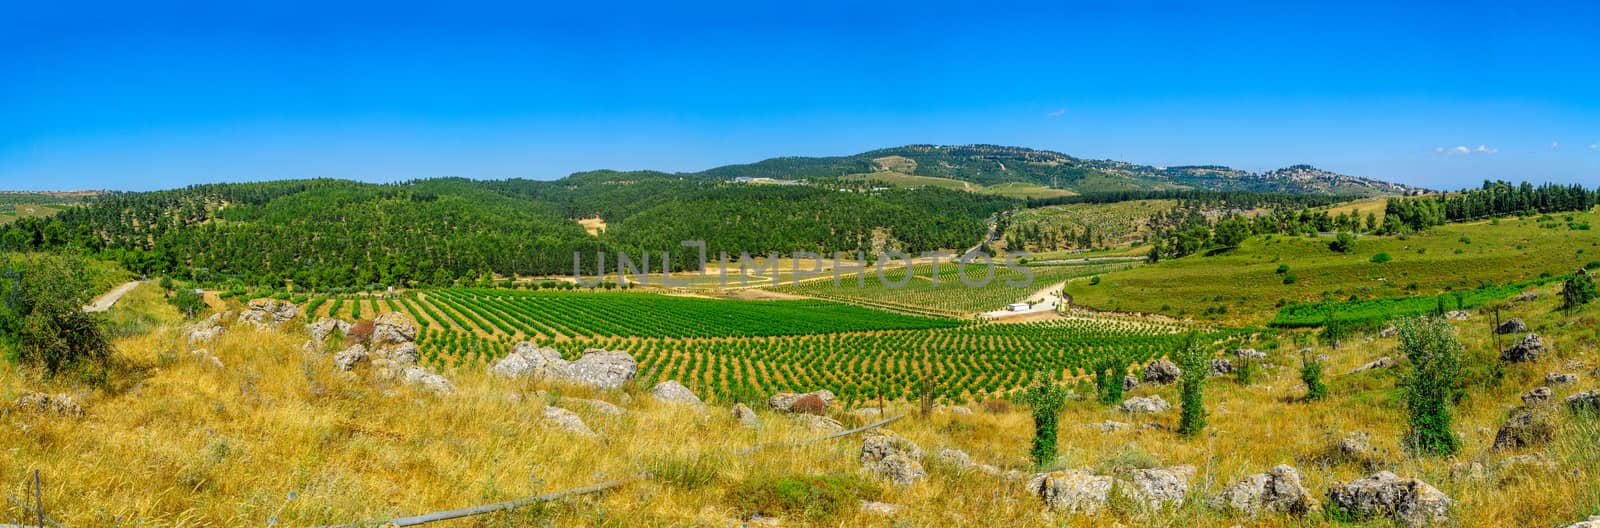 Panoramic landscape of countryside in Meron, upper Galilee, Northern Israel